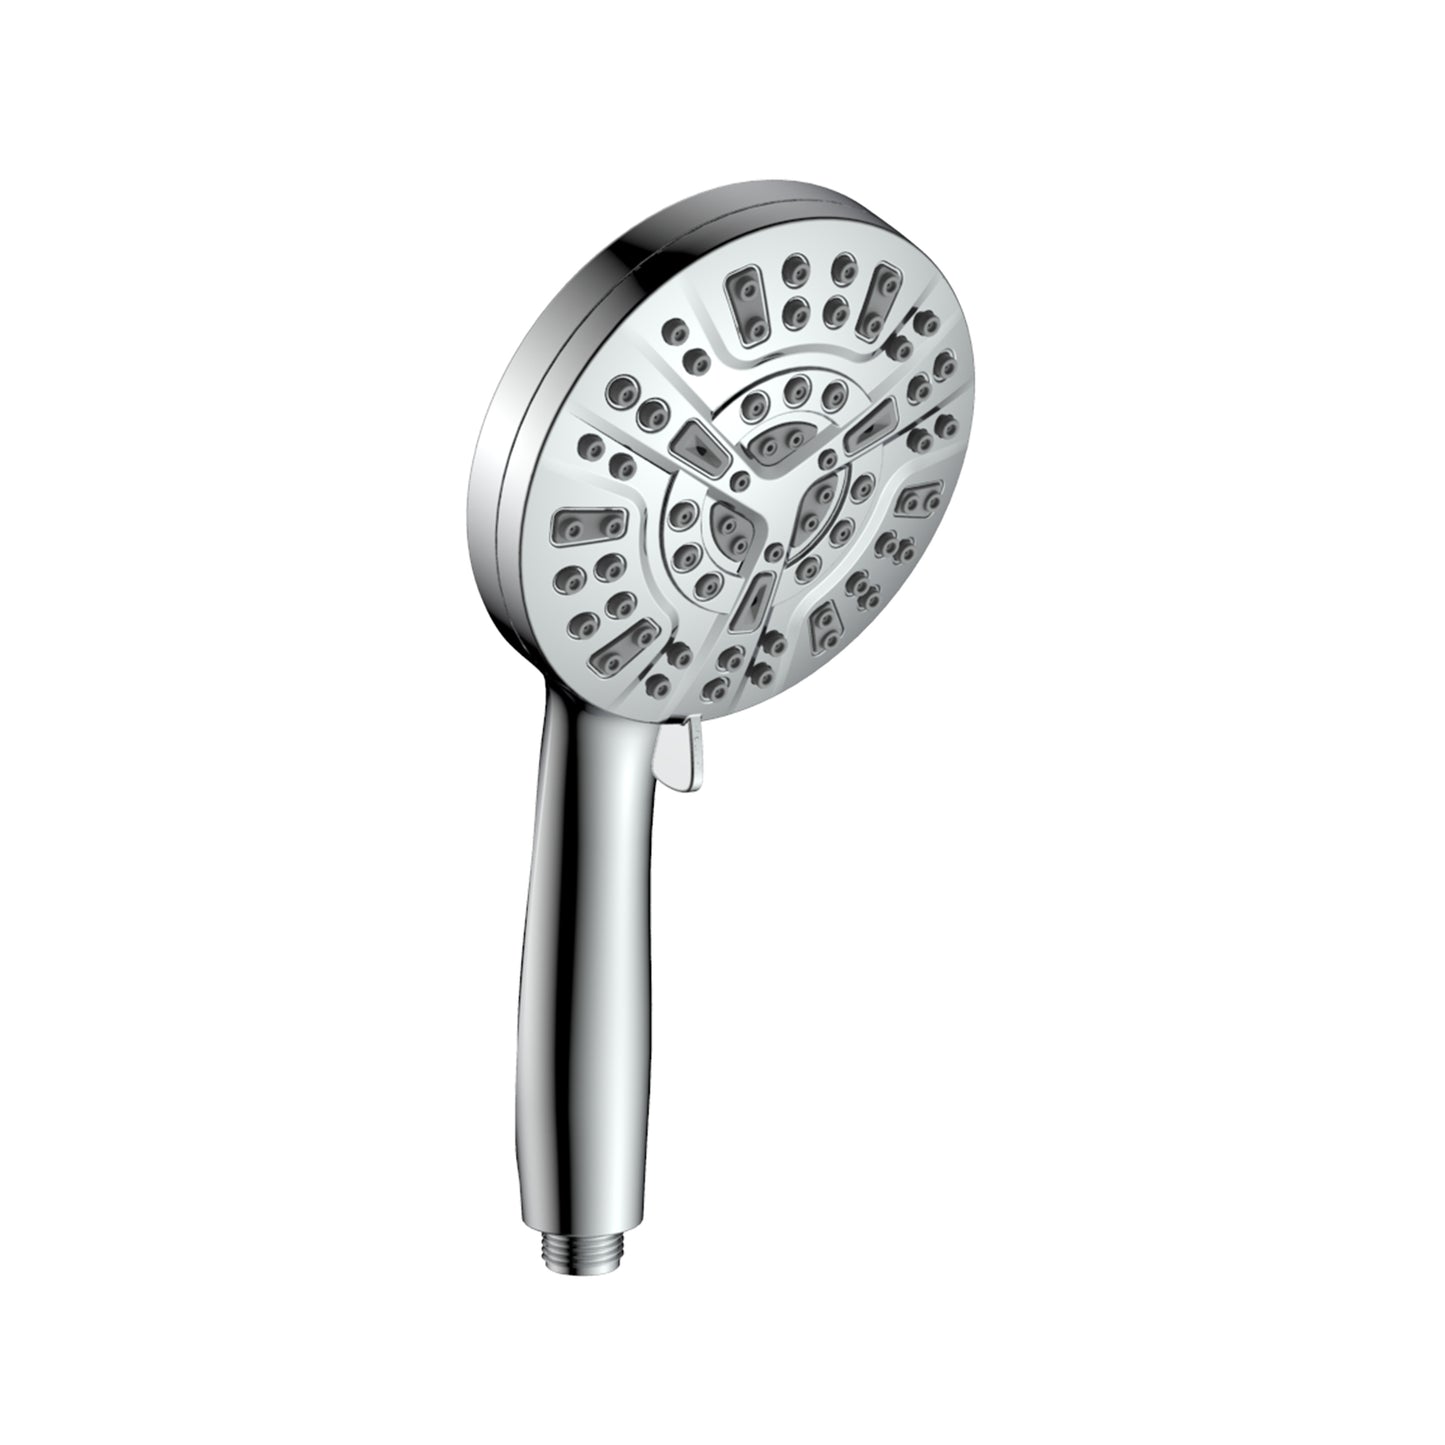 Large Amount of water Multi Function Shower Head - Shower System,  9-Function Hand Shower, Simple Style, Chrome